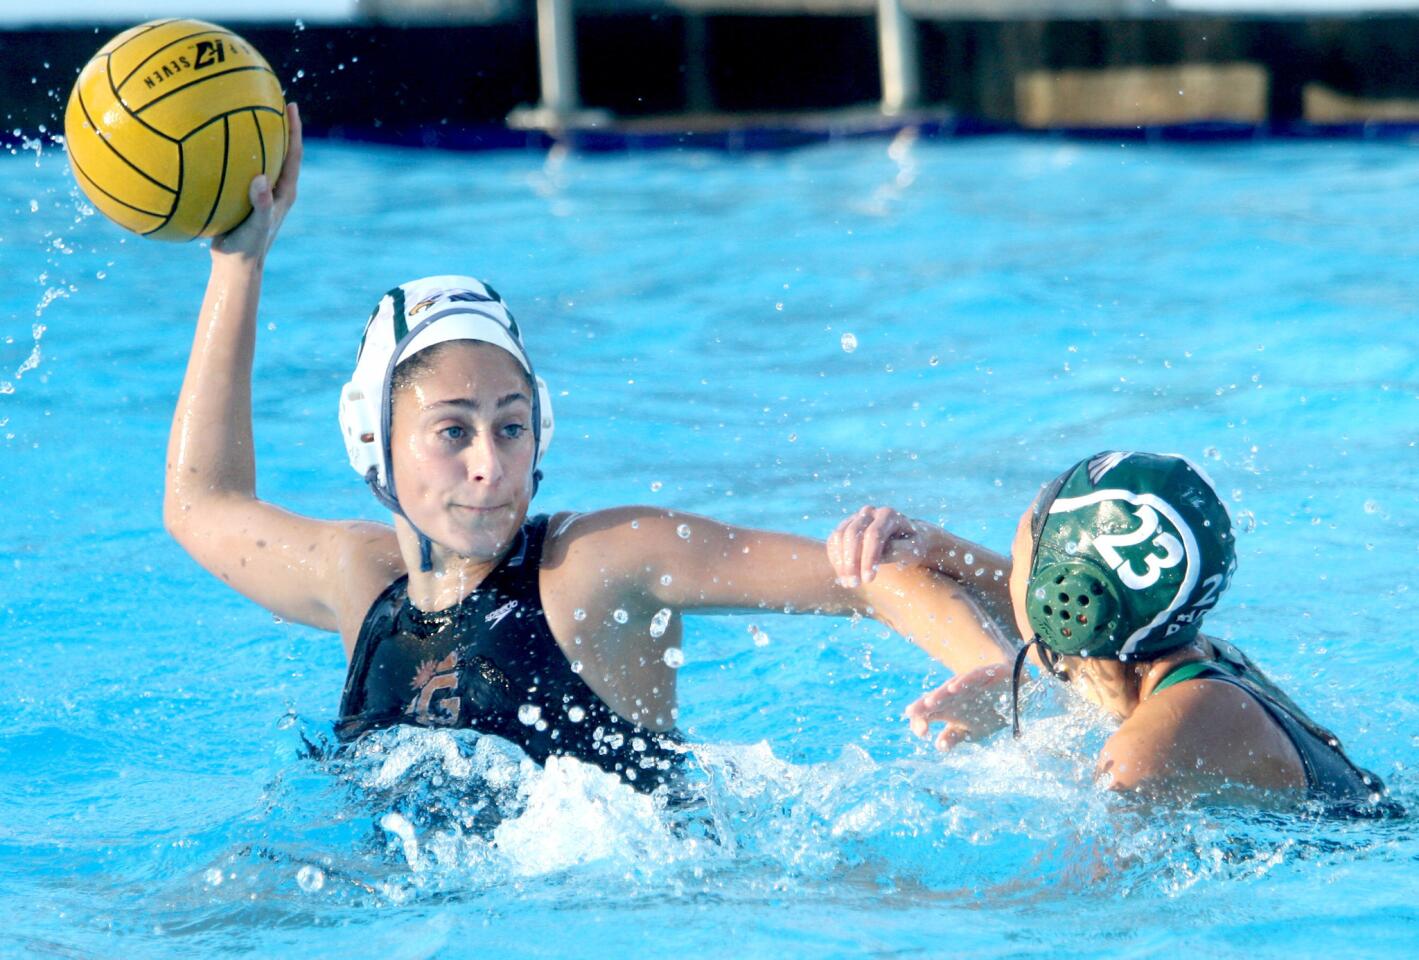 Glendale High School girls water polo player #9 Lori Berberian, left, looks to shoot with pressure from #23 Lian Utsumi in away game at Eagle Rock High School in Eagle Rock on Tuesday, December 1, 2015.